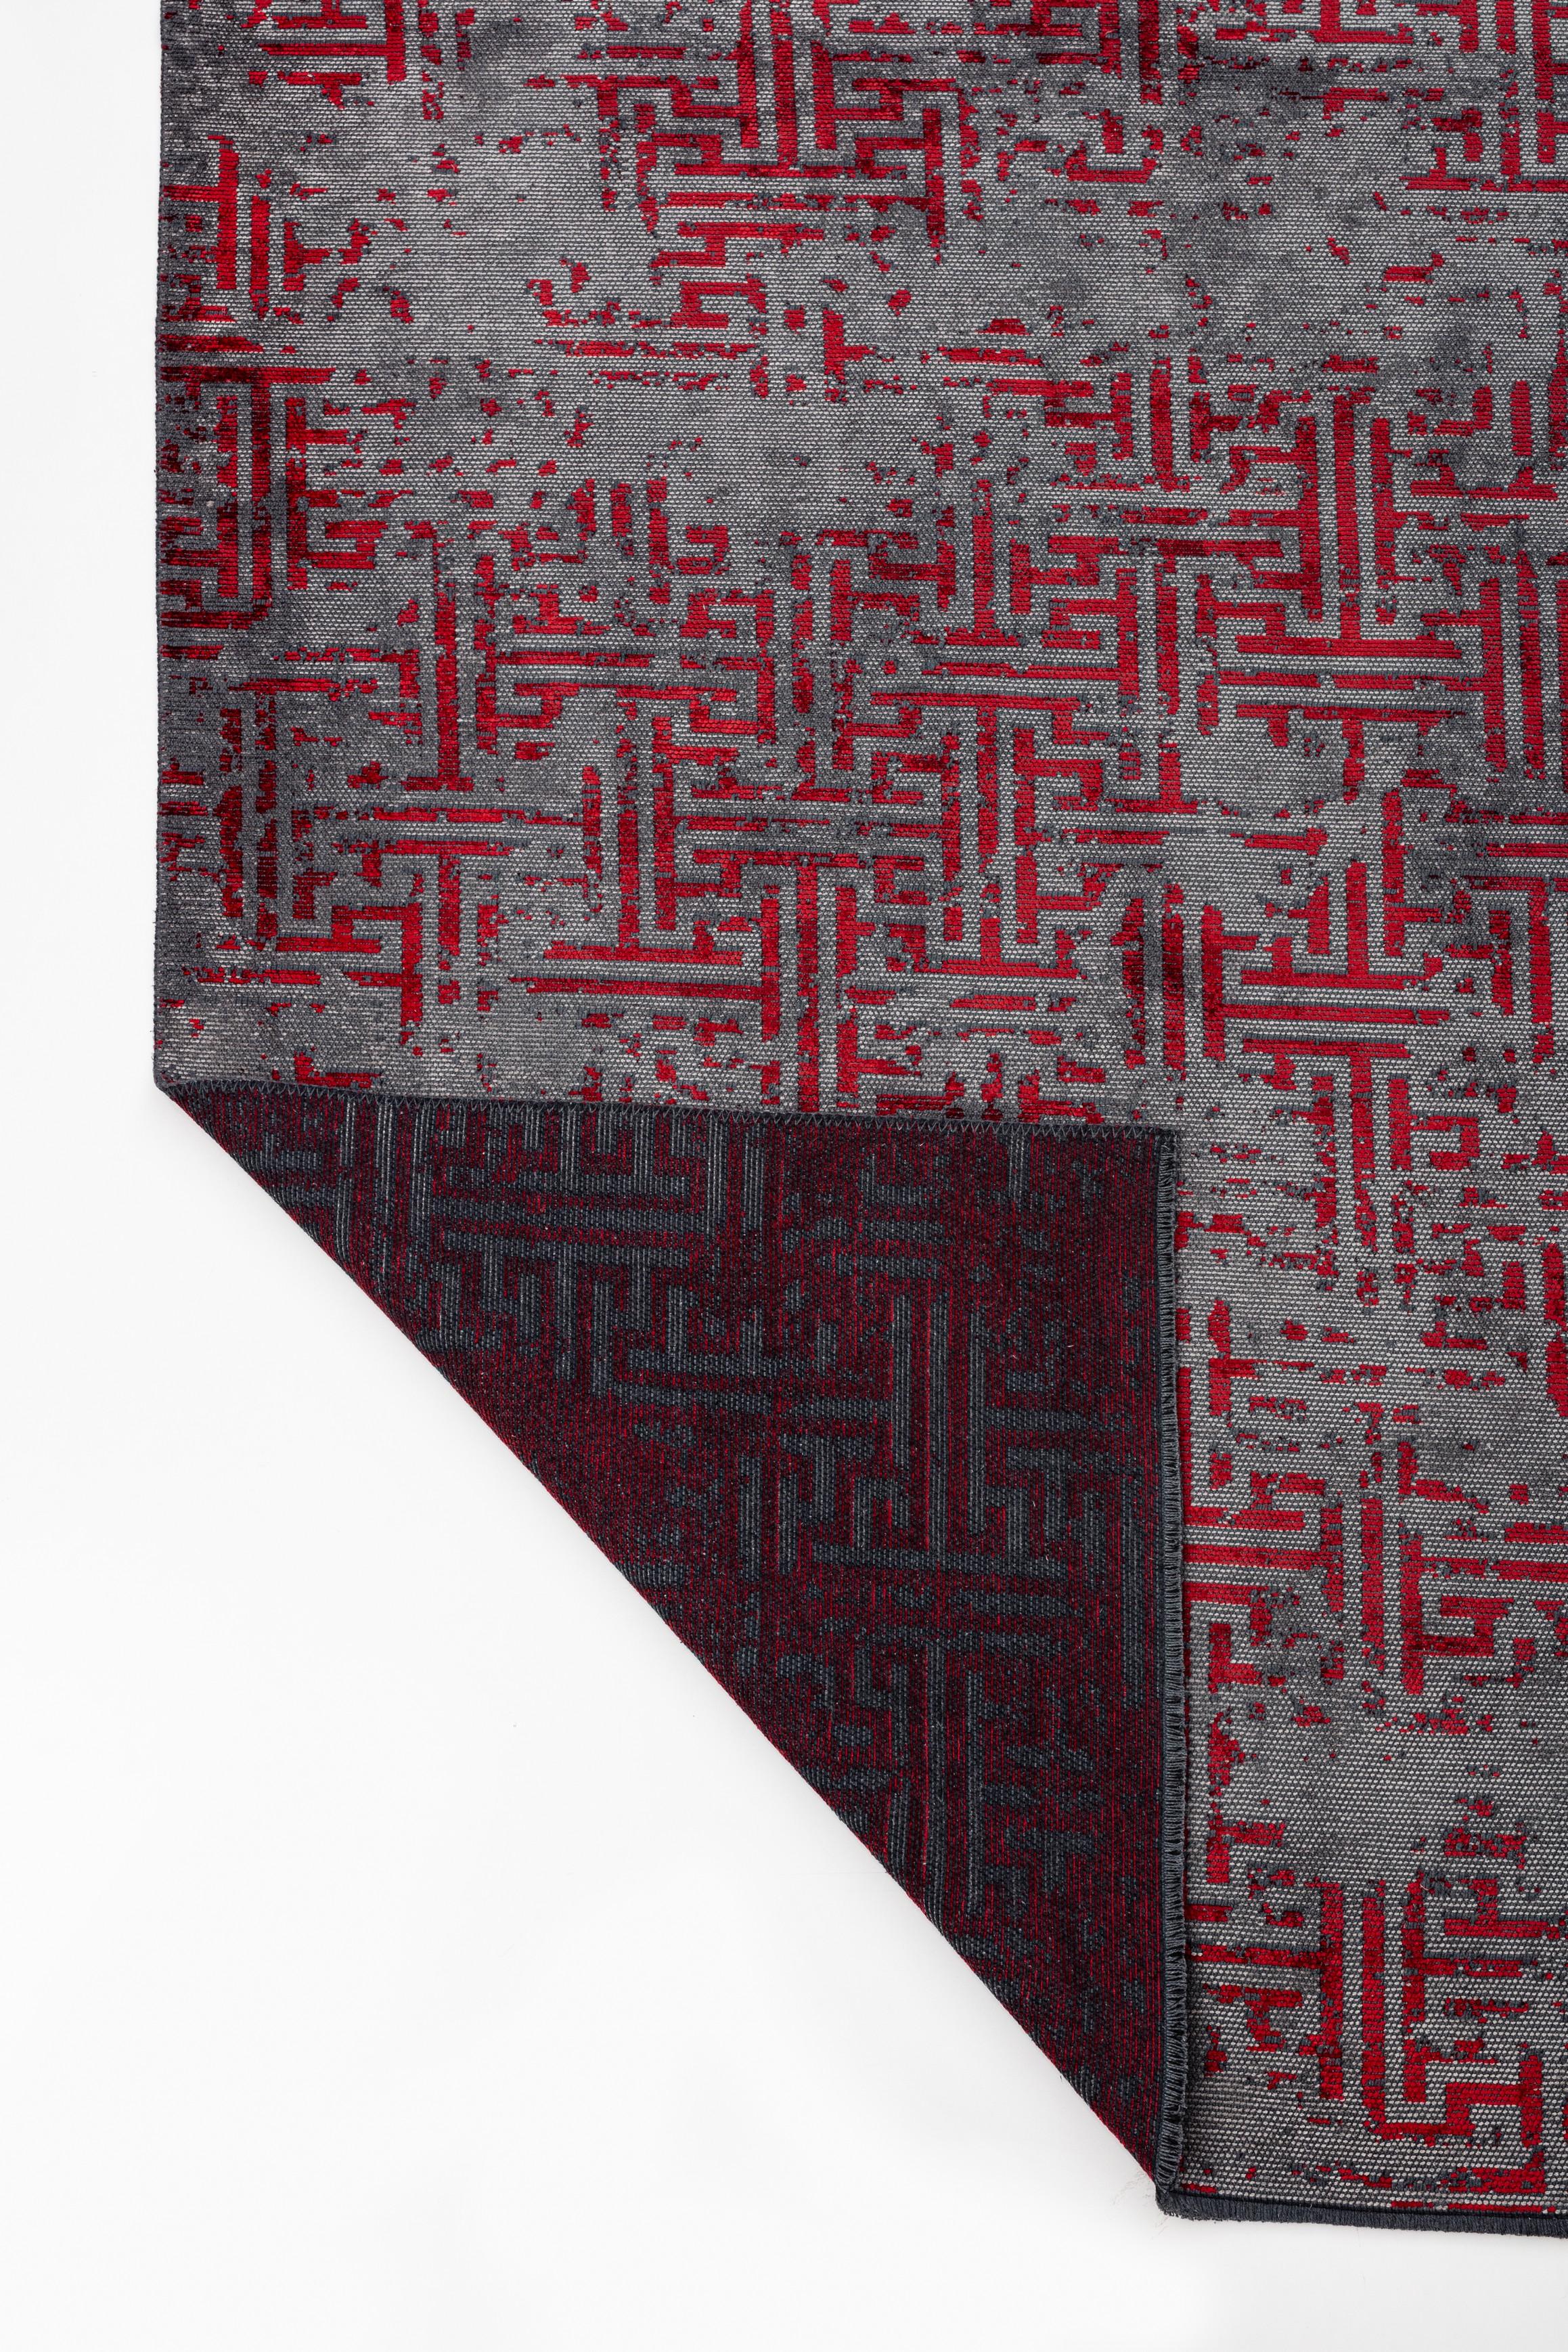 For Sale:  (Red) Modern Toile Luxury Hand-Finished Area Rug 3